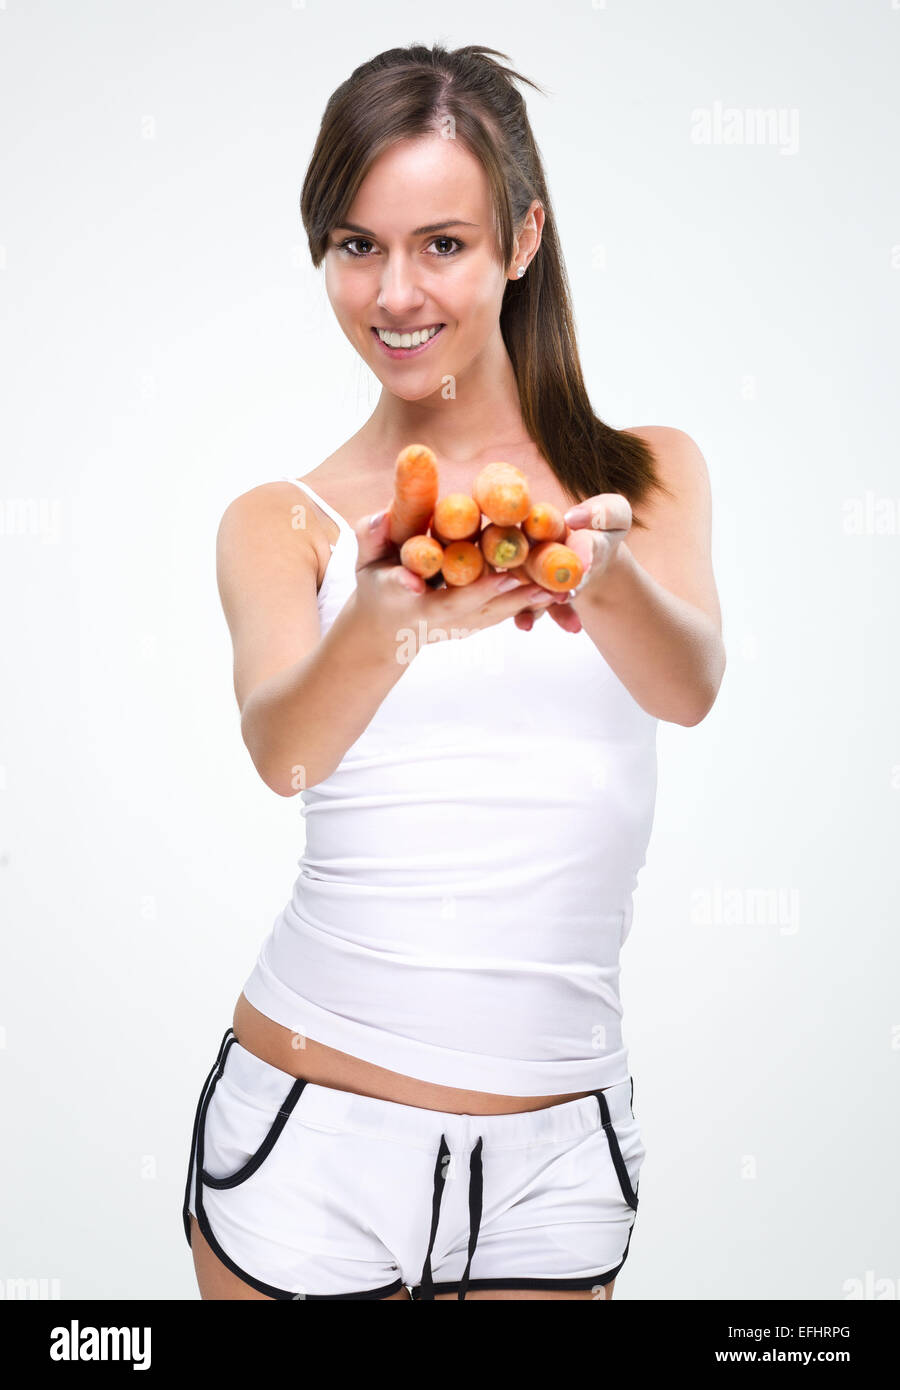 Healthy lifestyle! Beautiful woman holding carrot Stock Photo